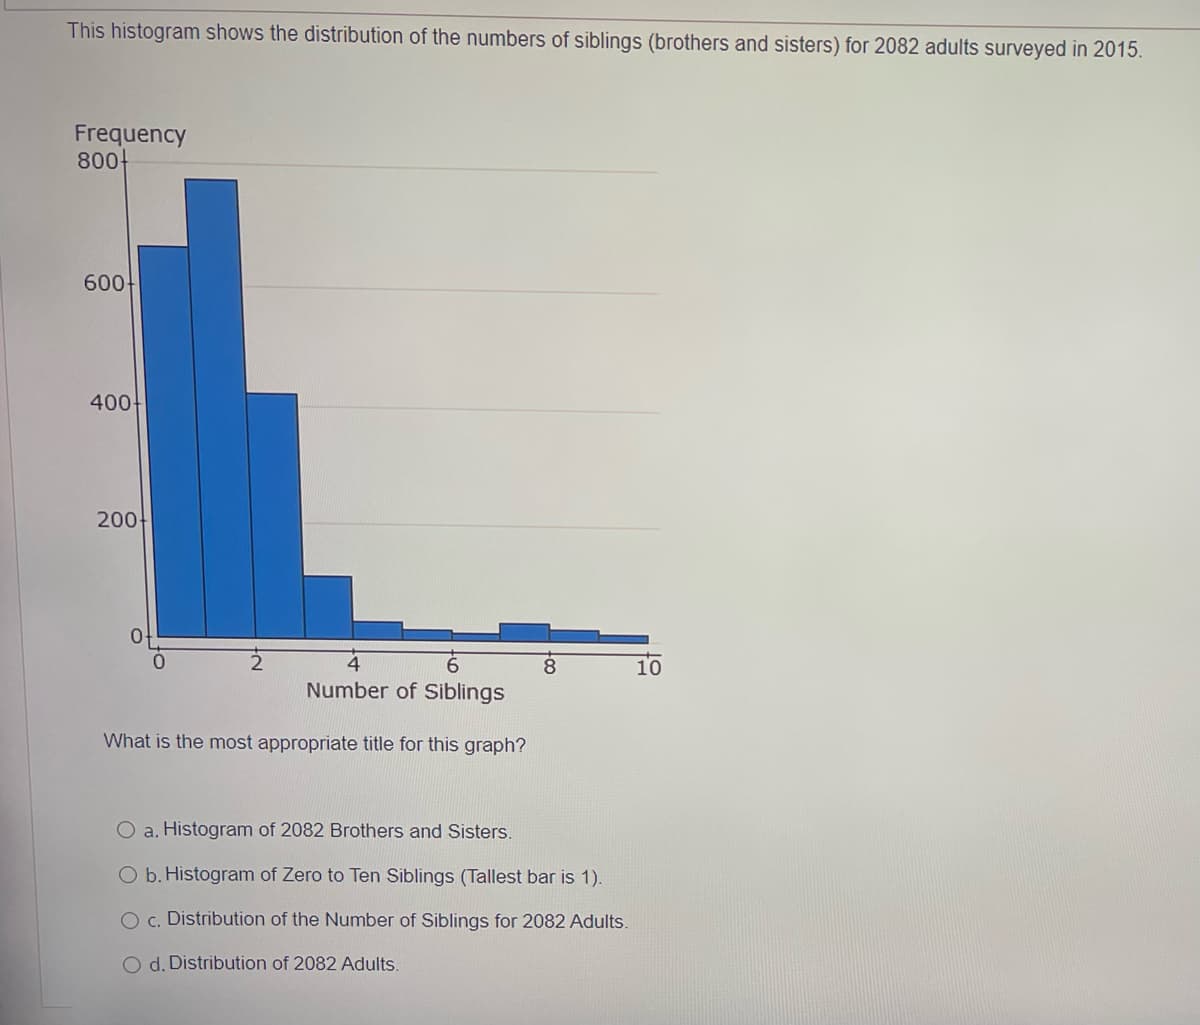 This histogram shows the distribution of the numbers of siblings (brothers and sisters) for 2082 adults surveyed in 2015.
Frequency
800
600
400
200
8
10
Number of Siblings
What is the most appropriate title for this graph?
O a. Histogram of 2082 Brothers and Sisters.
b. Histogram of Zero to Ten Siblings (Tallest bar is 1).
c. Distribution of the Number of Siblings for 2082 Adults.
O d. Distribution of 2082 Adults.
